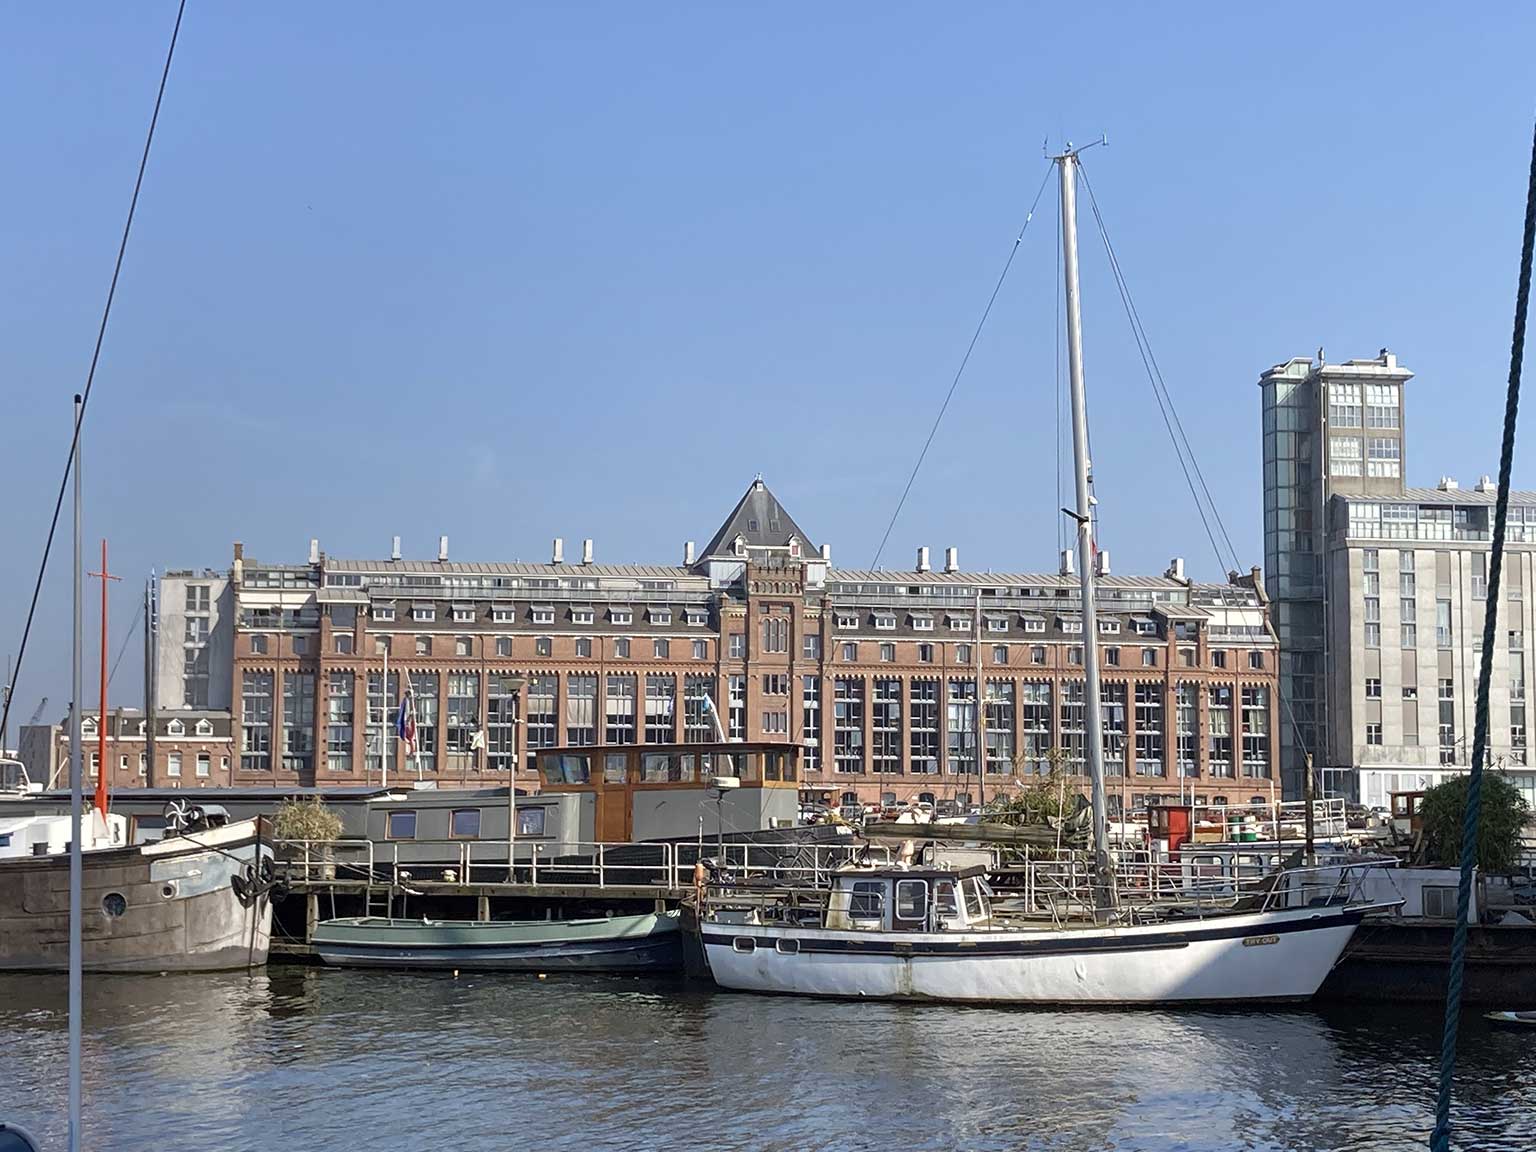 View from Oude Houthaven, Amsterdam, towards Korthals Altes silo and Betonnen silo